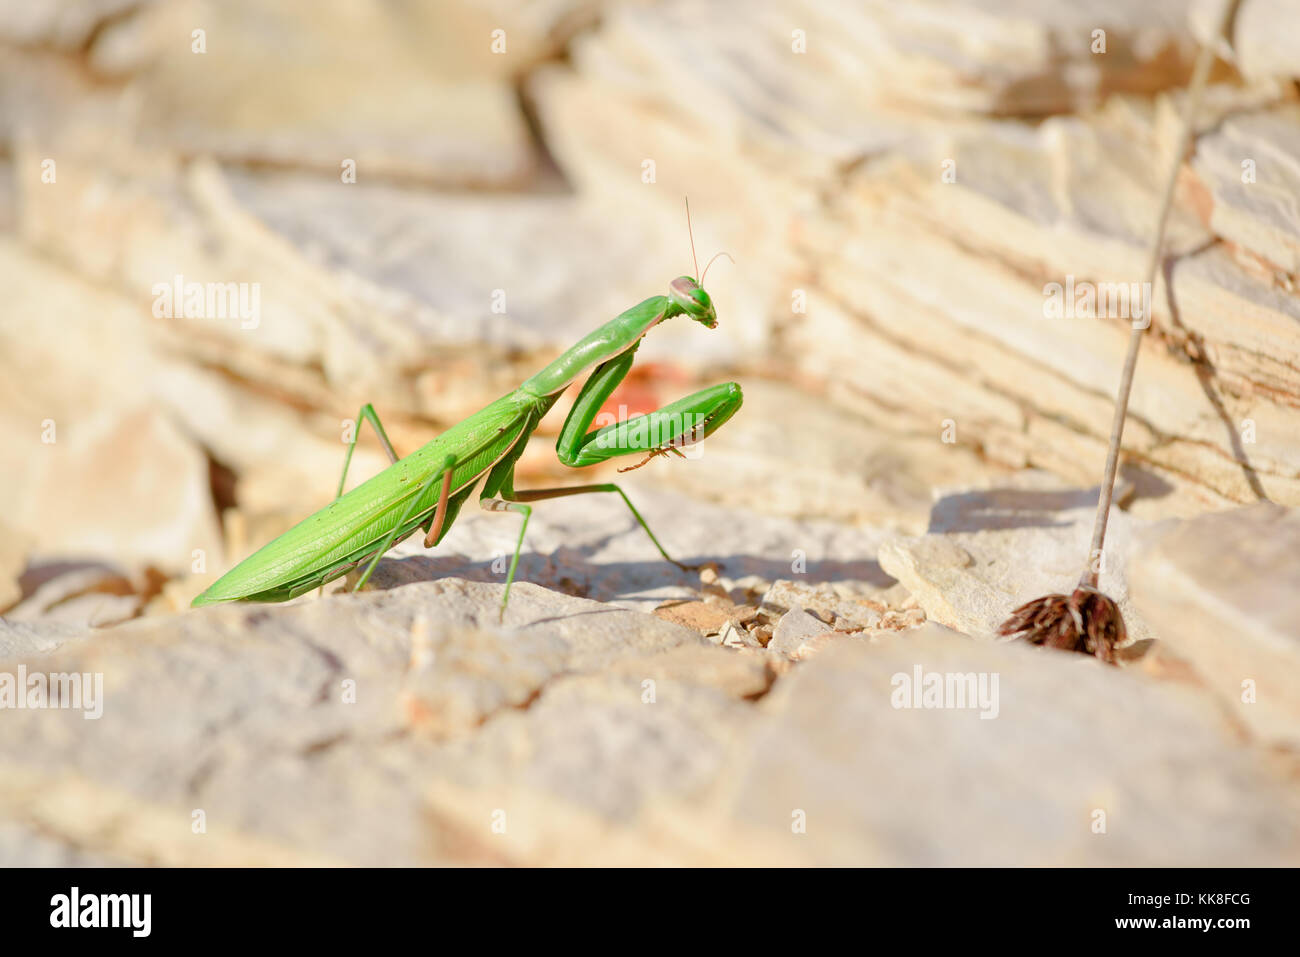 The European mantis, praying mantis or Mantis religiosa is a large hemimetabolic insect in the family of the Mantidae (mantids), which is the largest Stock Photo